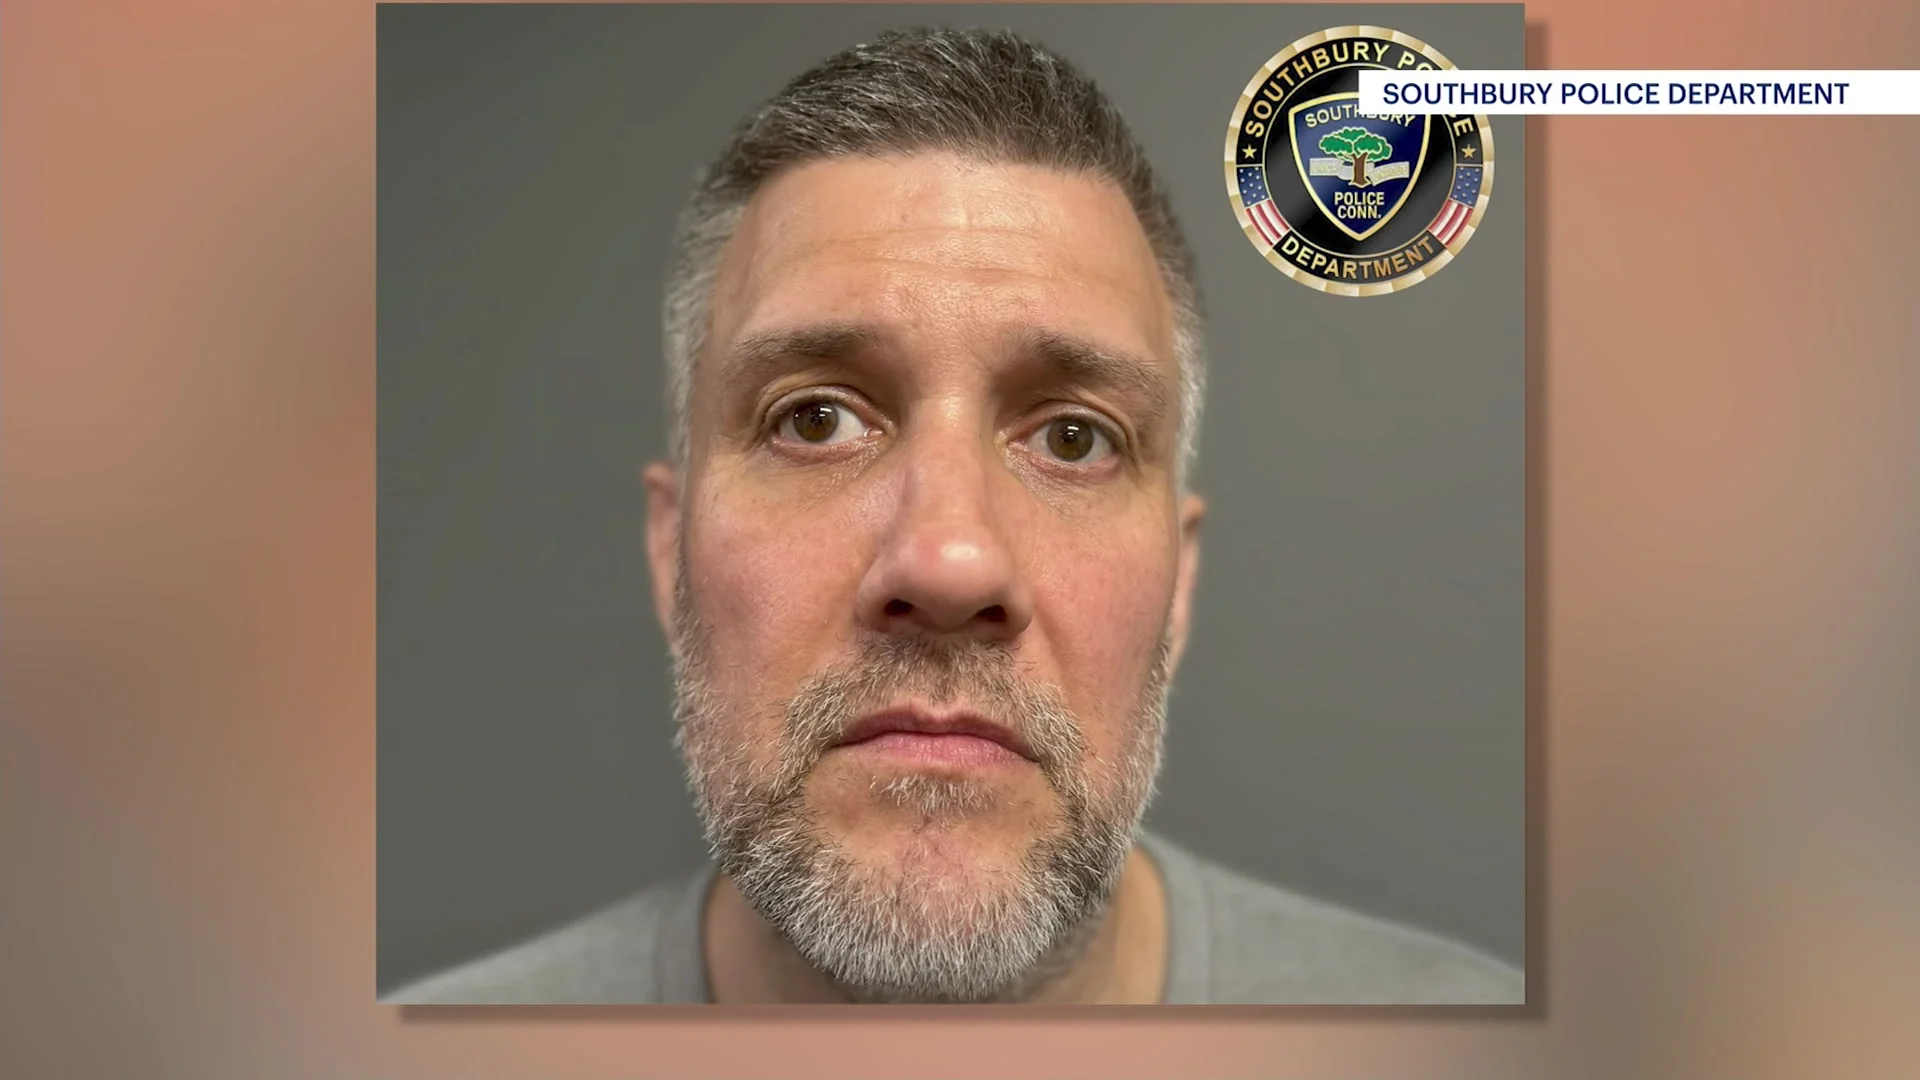 Police: Man accused of kidnapping, assaulting woman in Southbury 